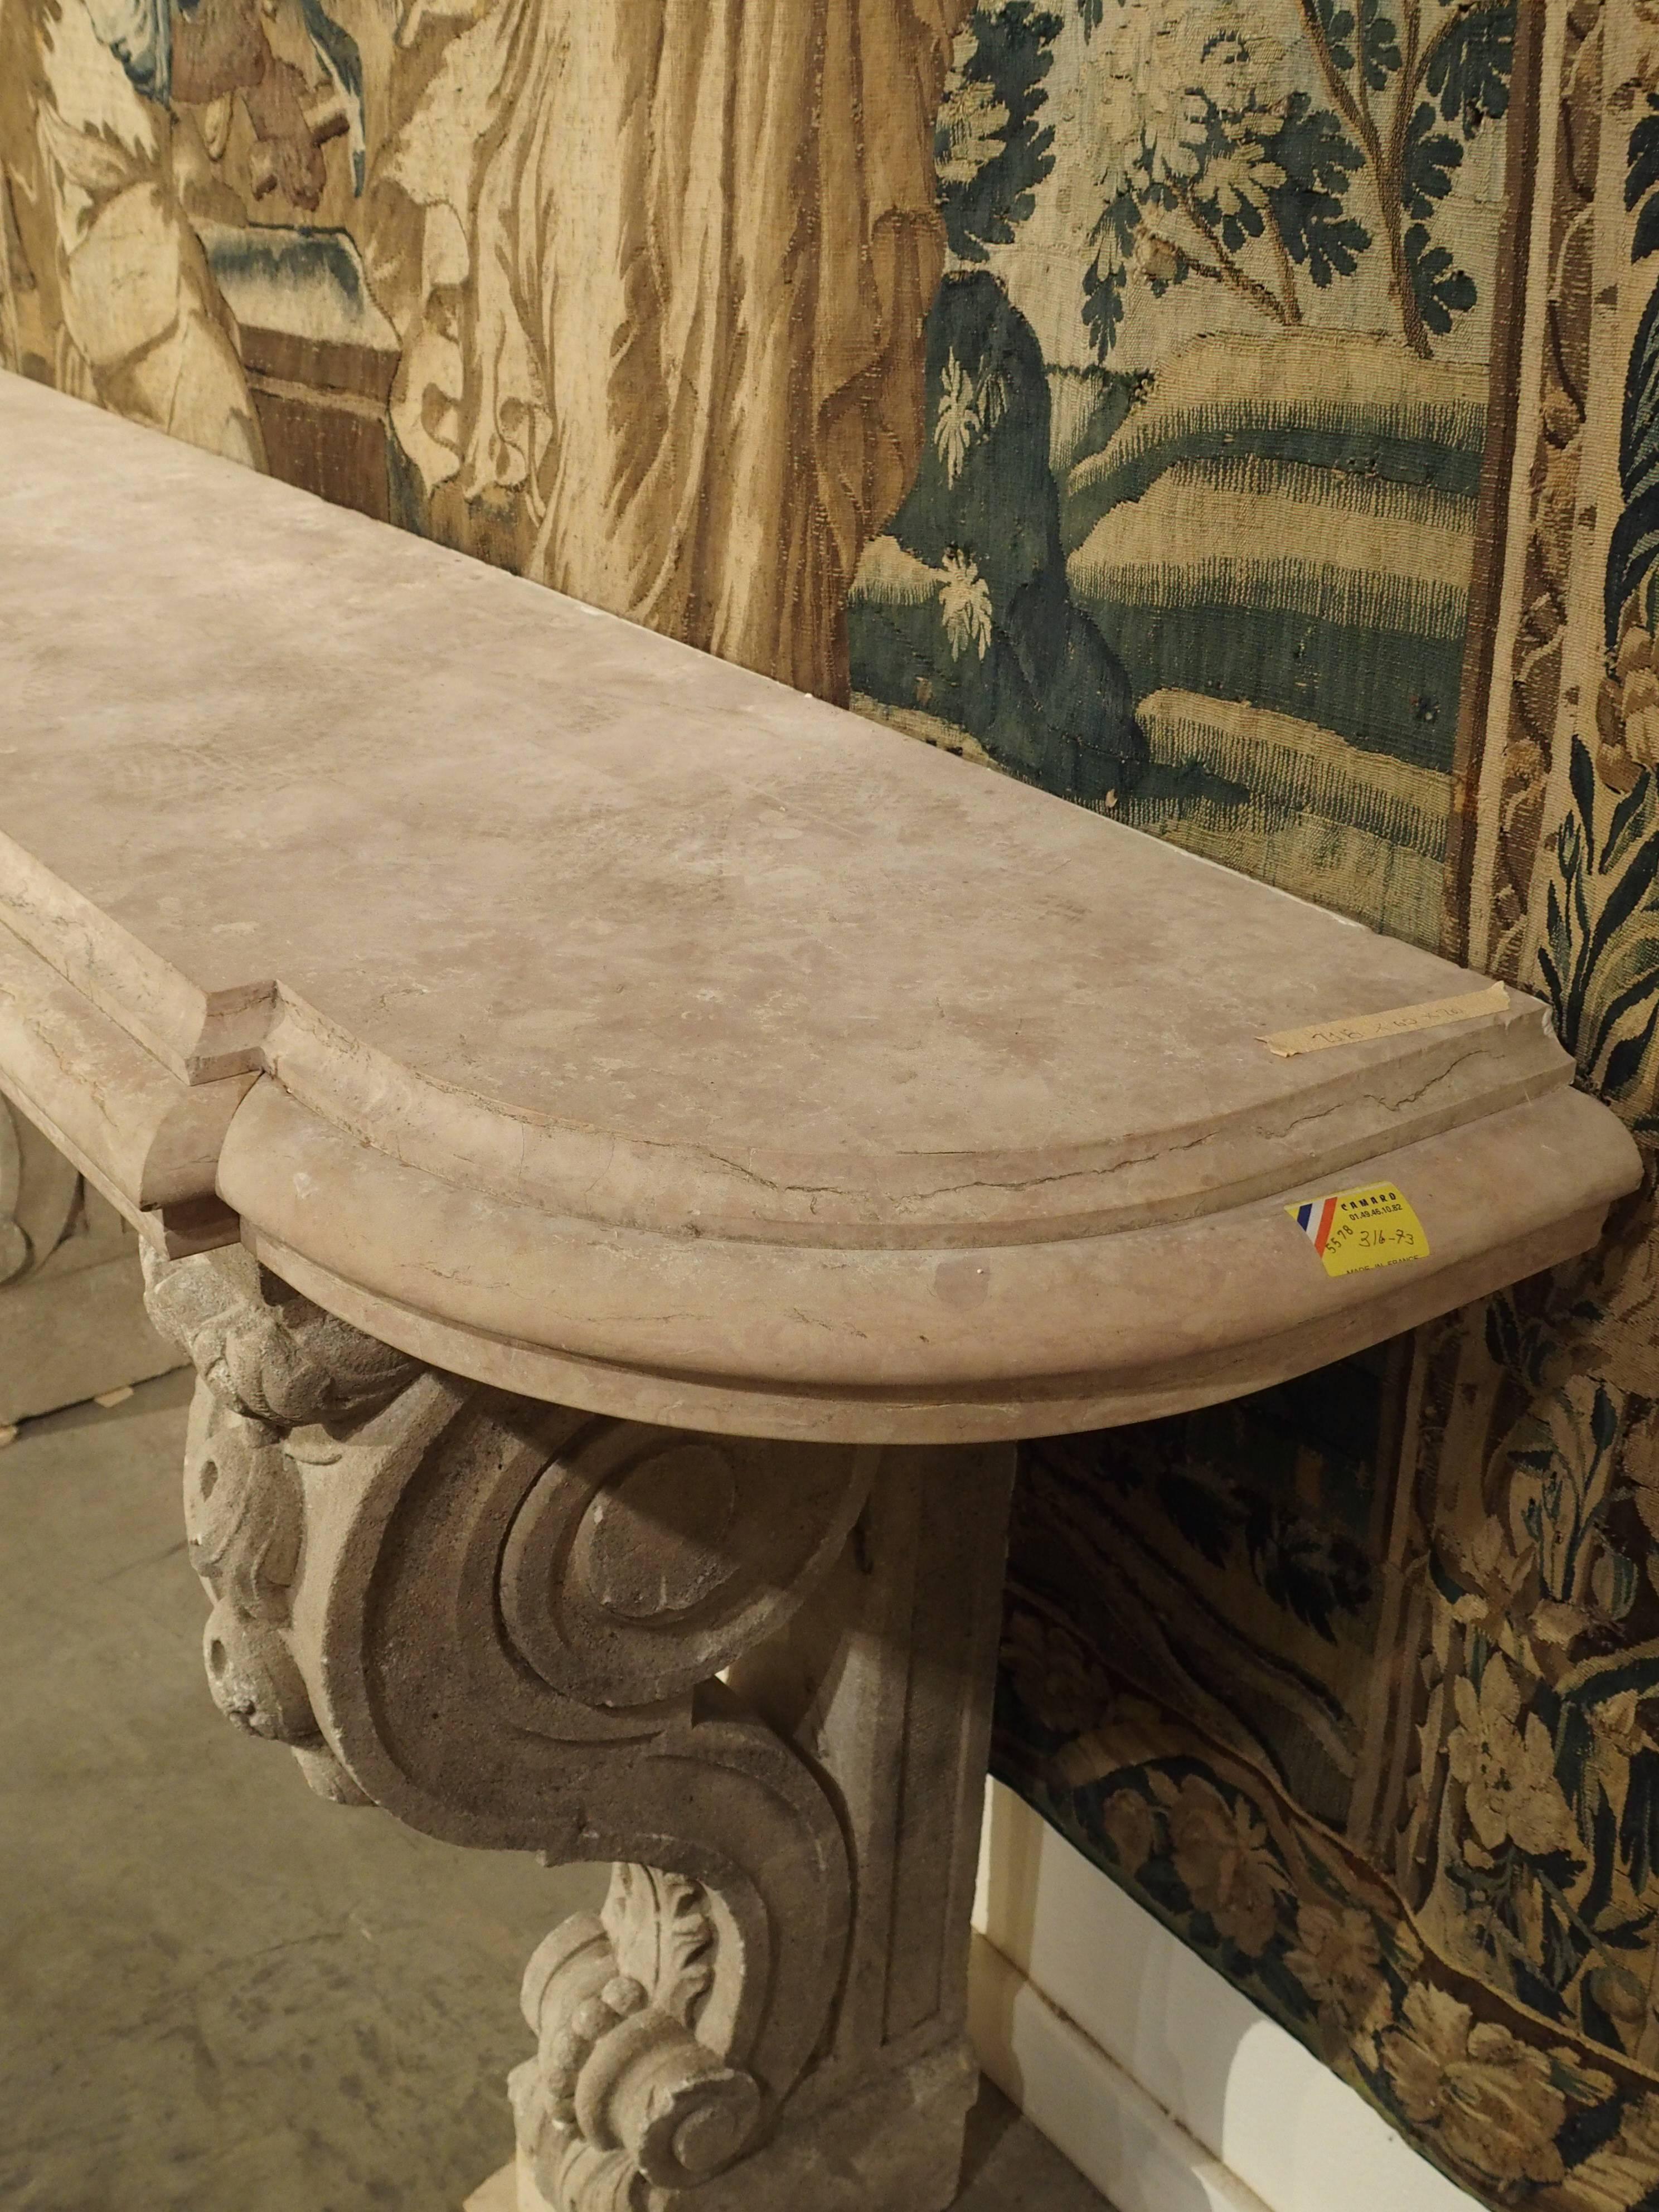 Early 20th Century Antique Marble-Top Console Table from South-East, France